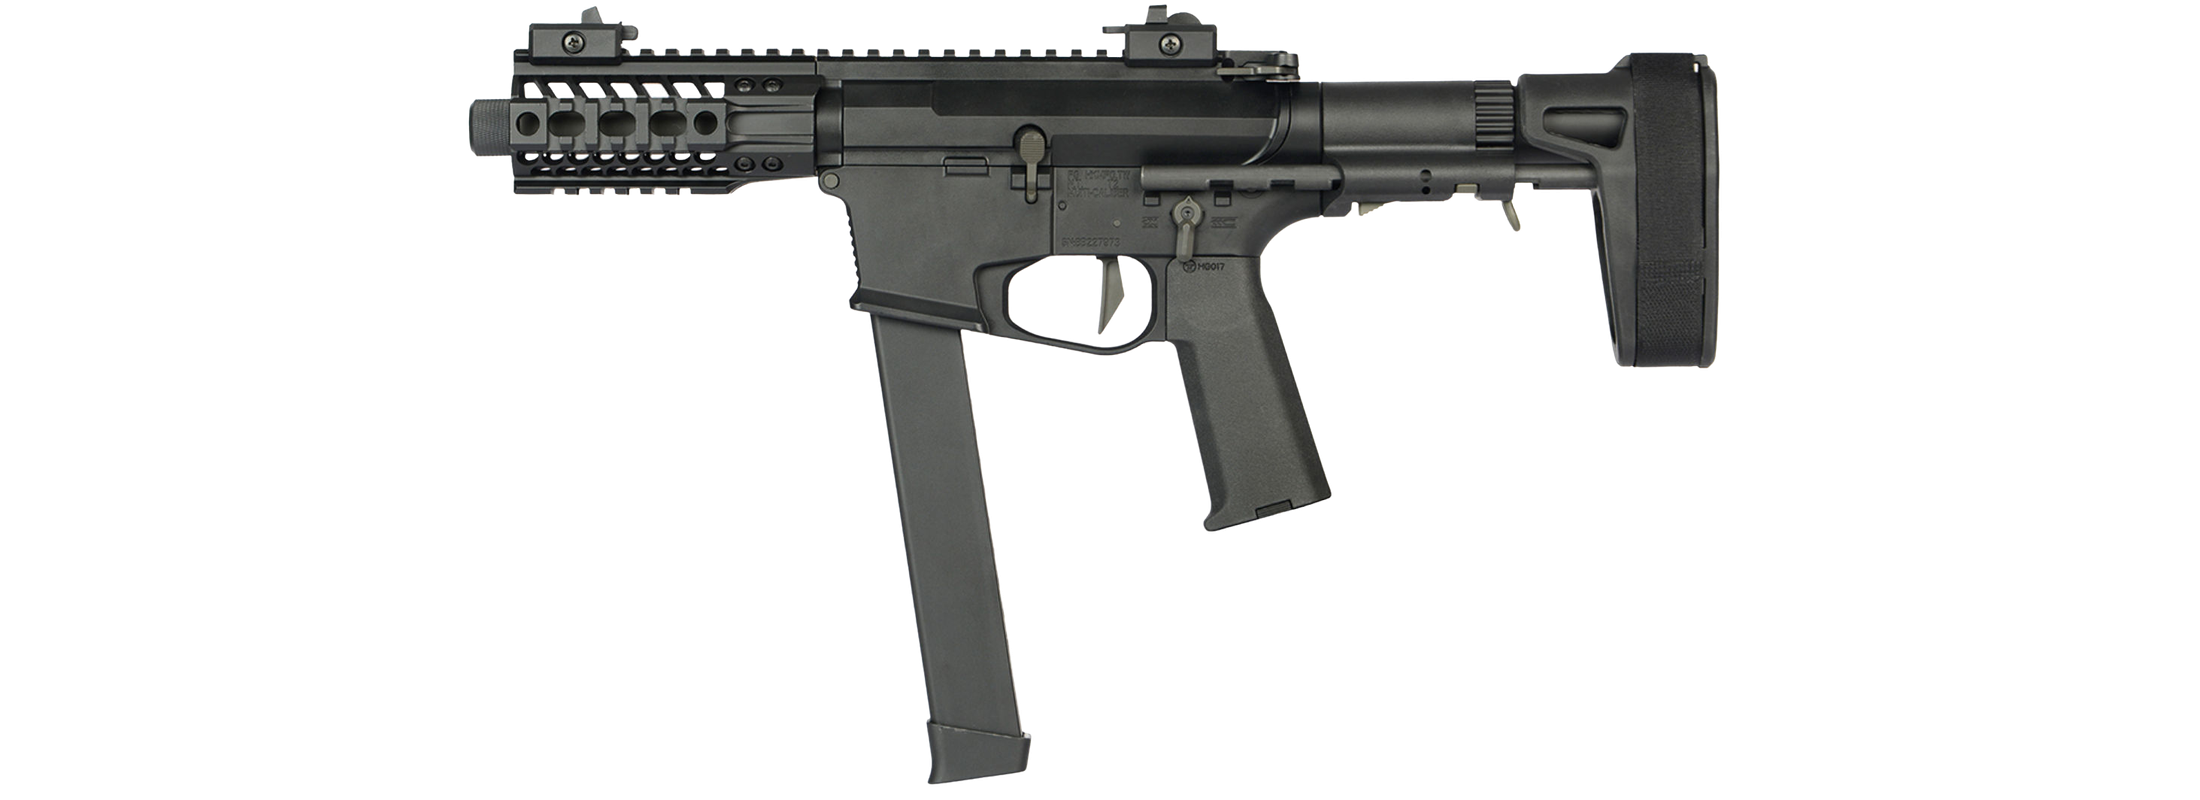 Ares M4 45 Pistol - X Class - Airsoft S-AEG